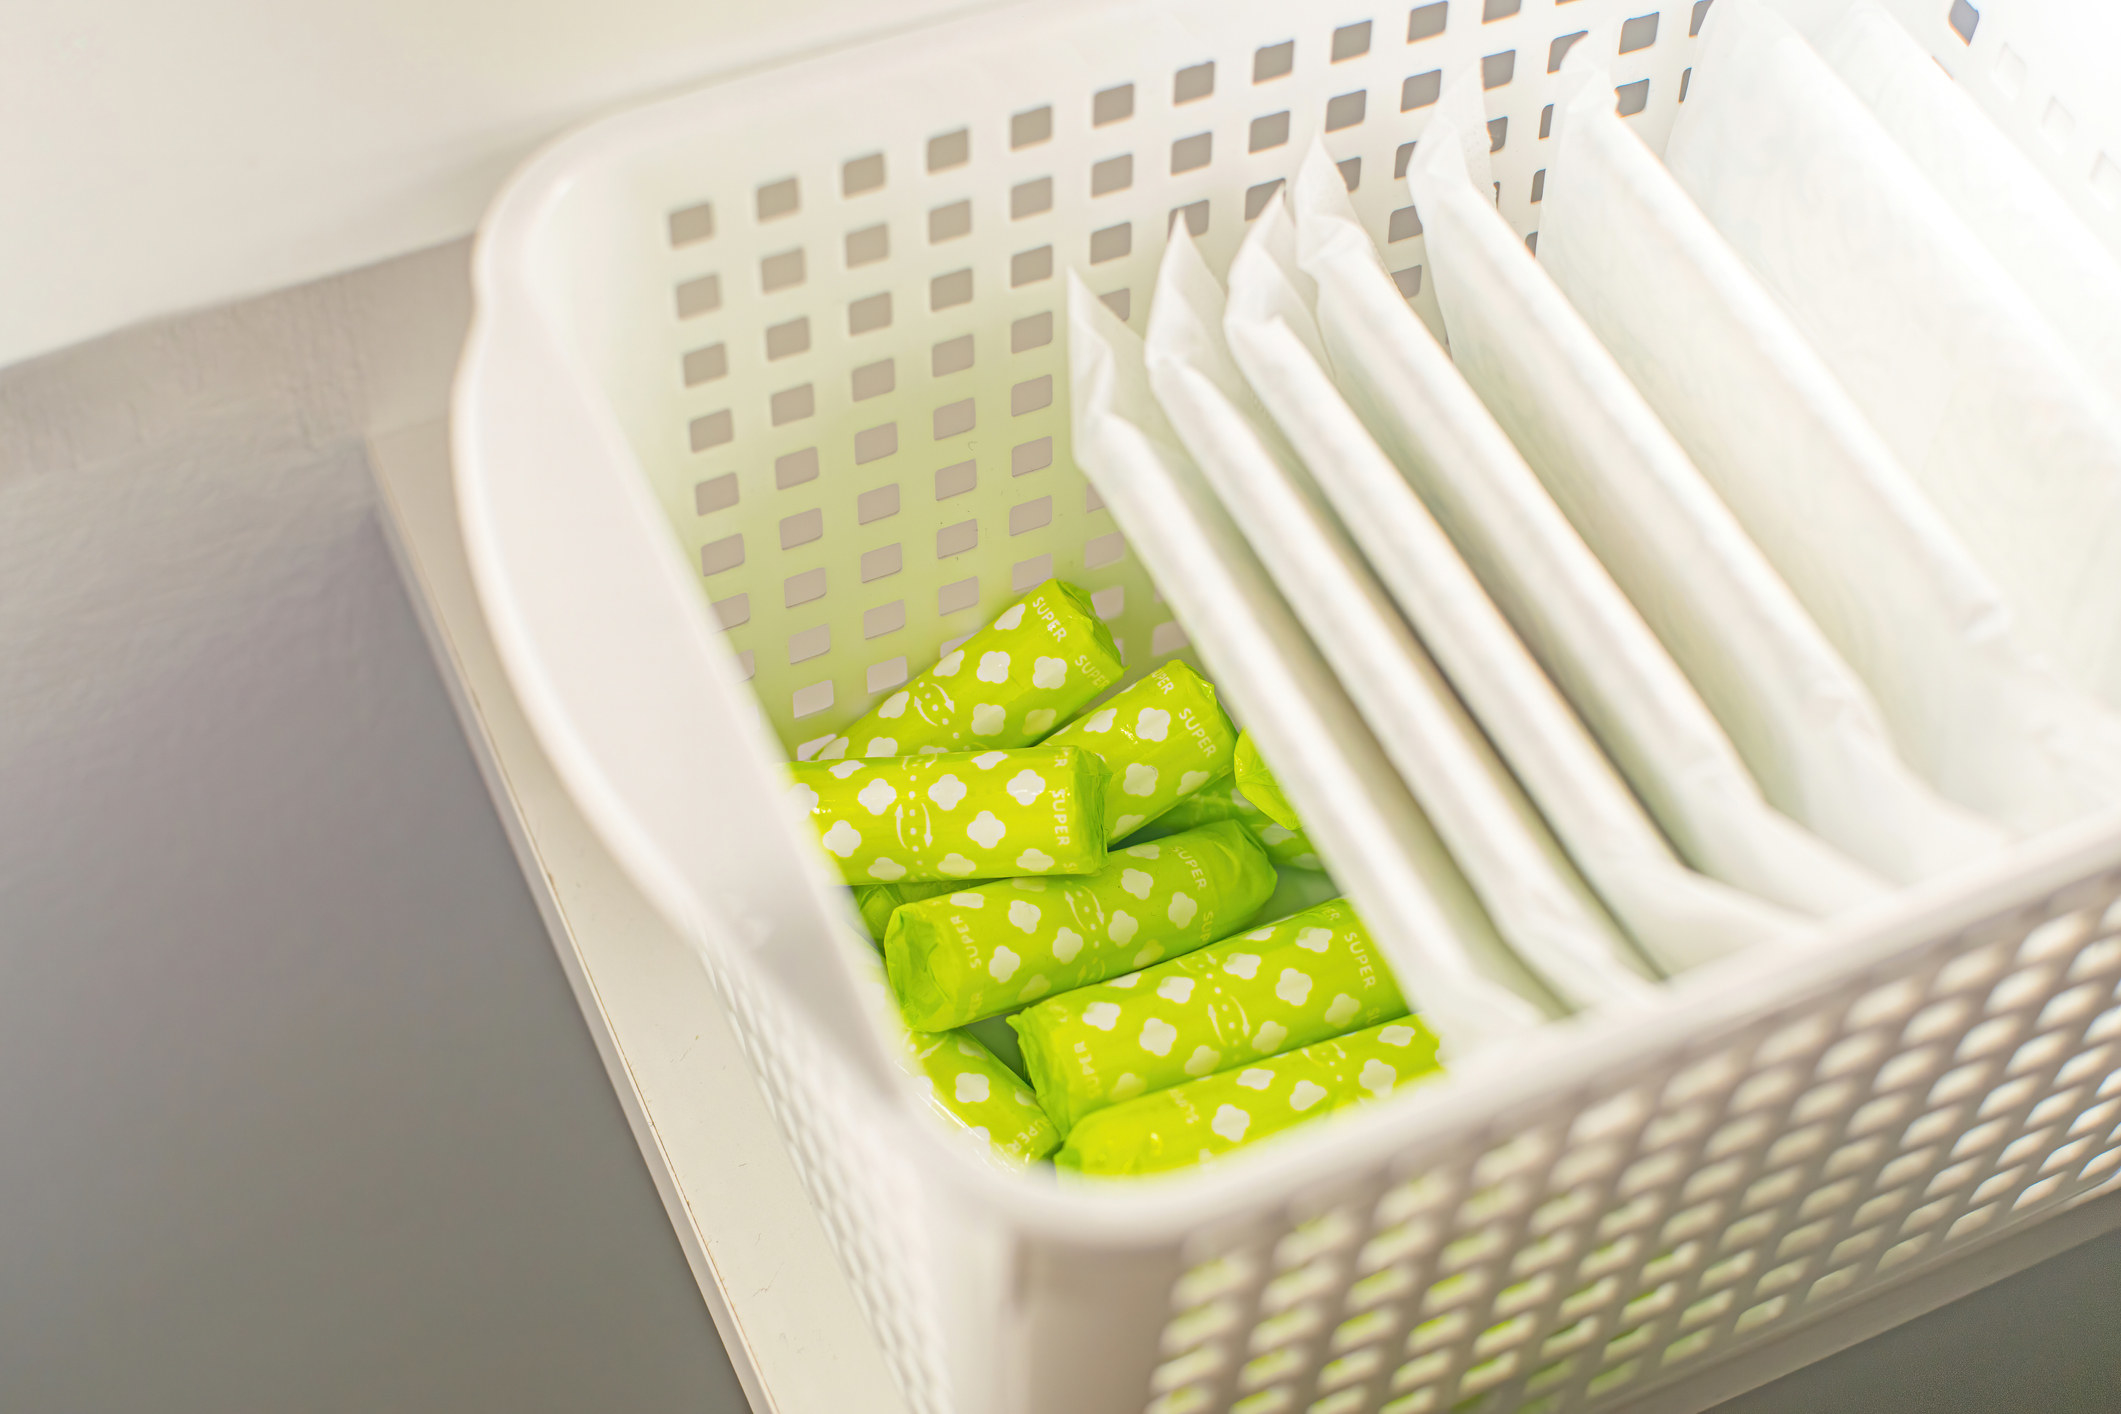 Storing tampons in a container